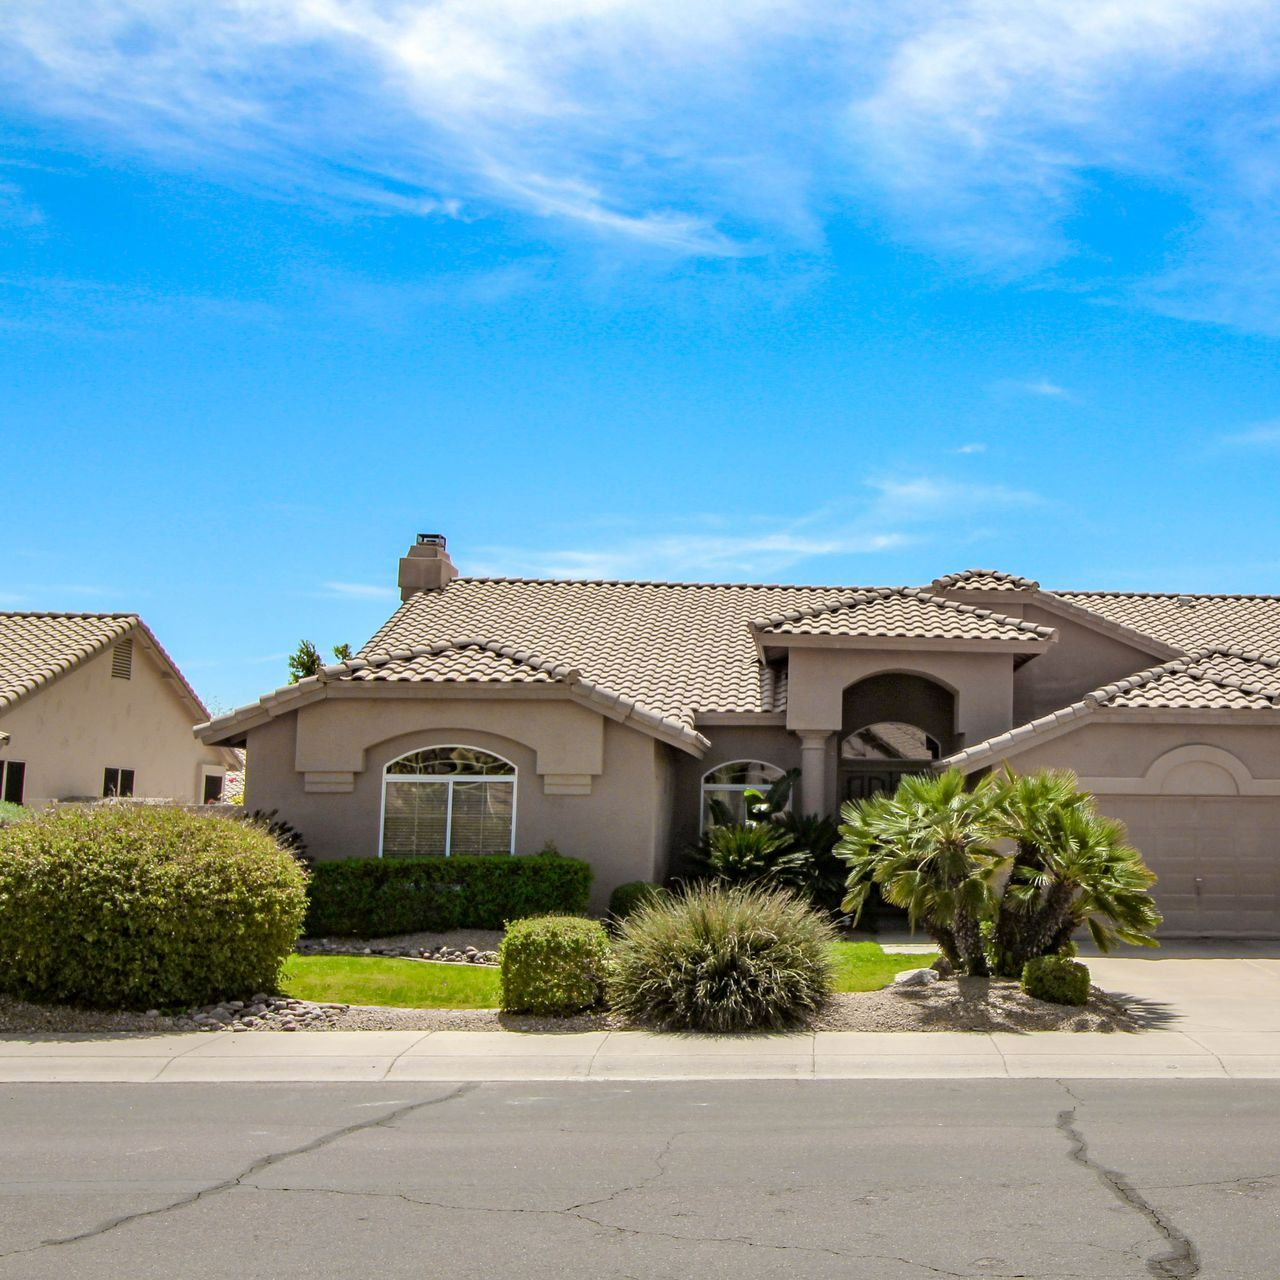 Are you selling your property in Maricopa County, AZ? We'll be glad to make a fast cash offer!